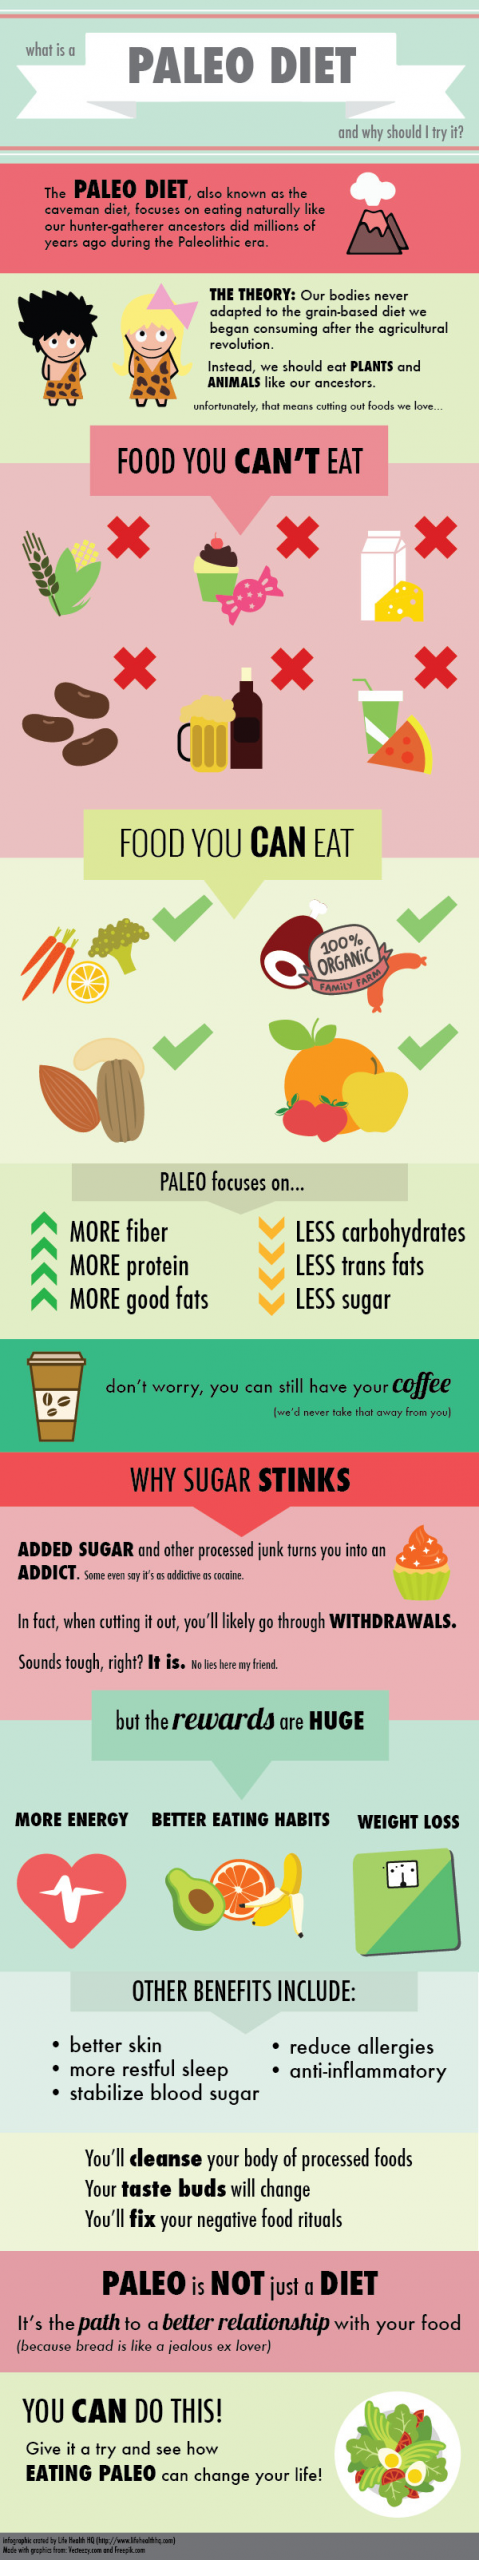 Paleo Diet Infographic
 What Is A Paleo Diet [Infographic]